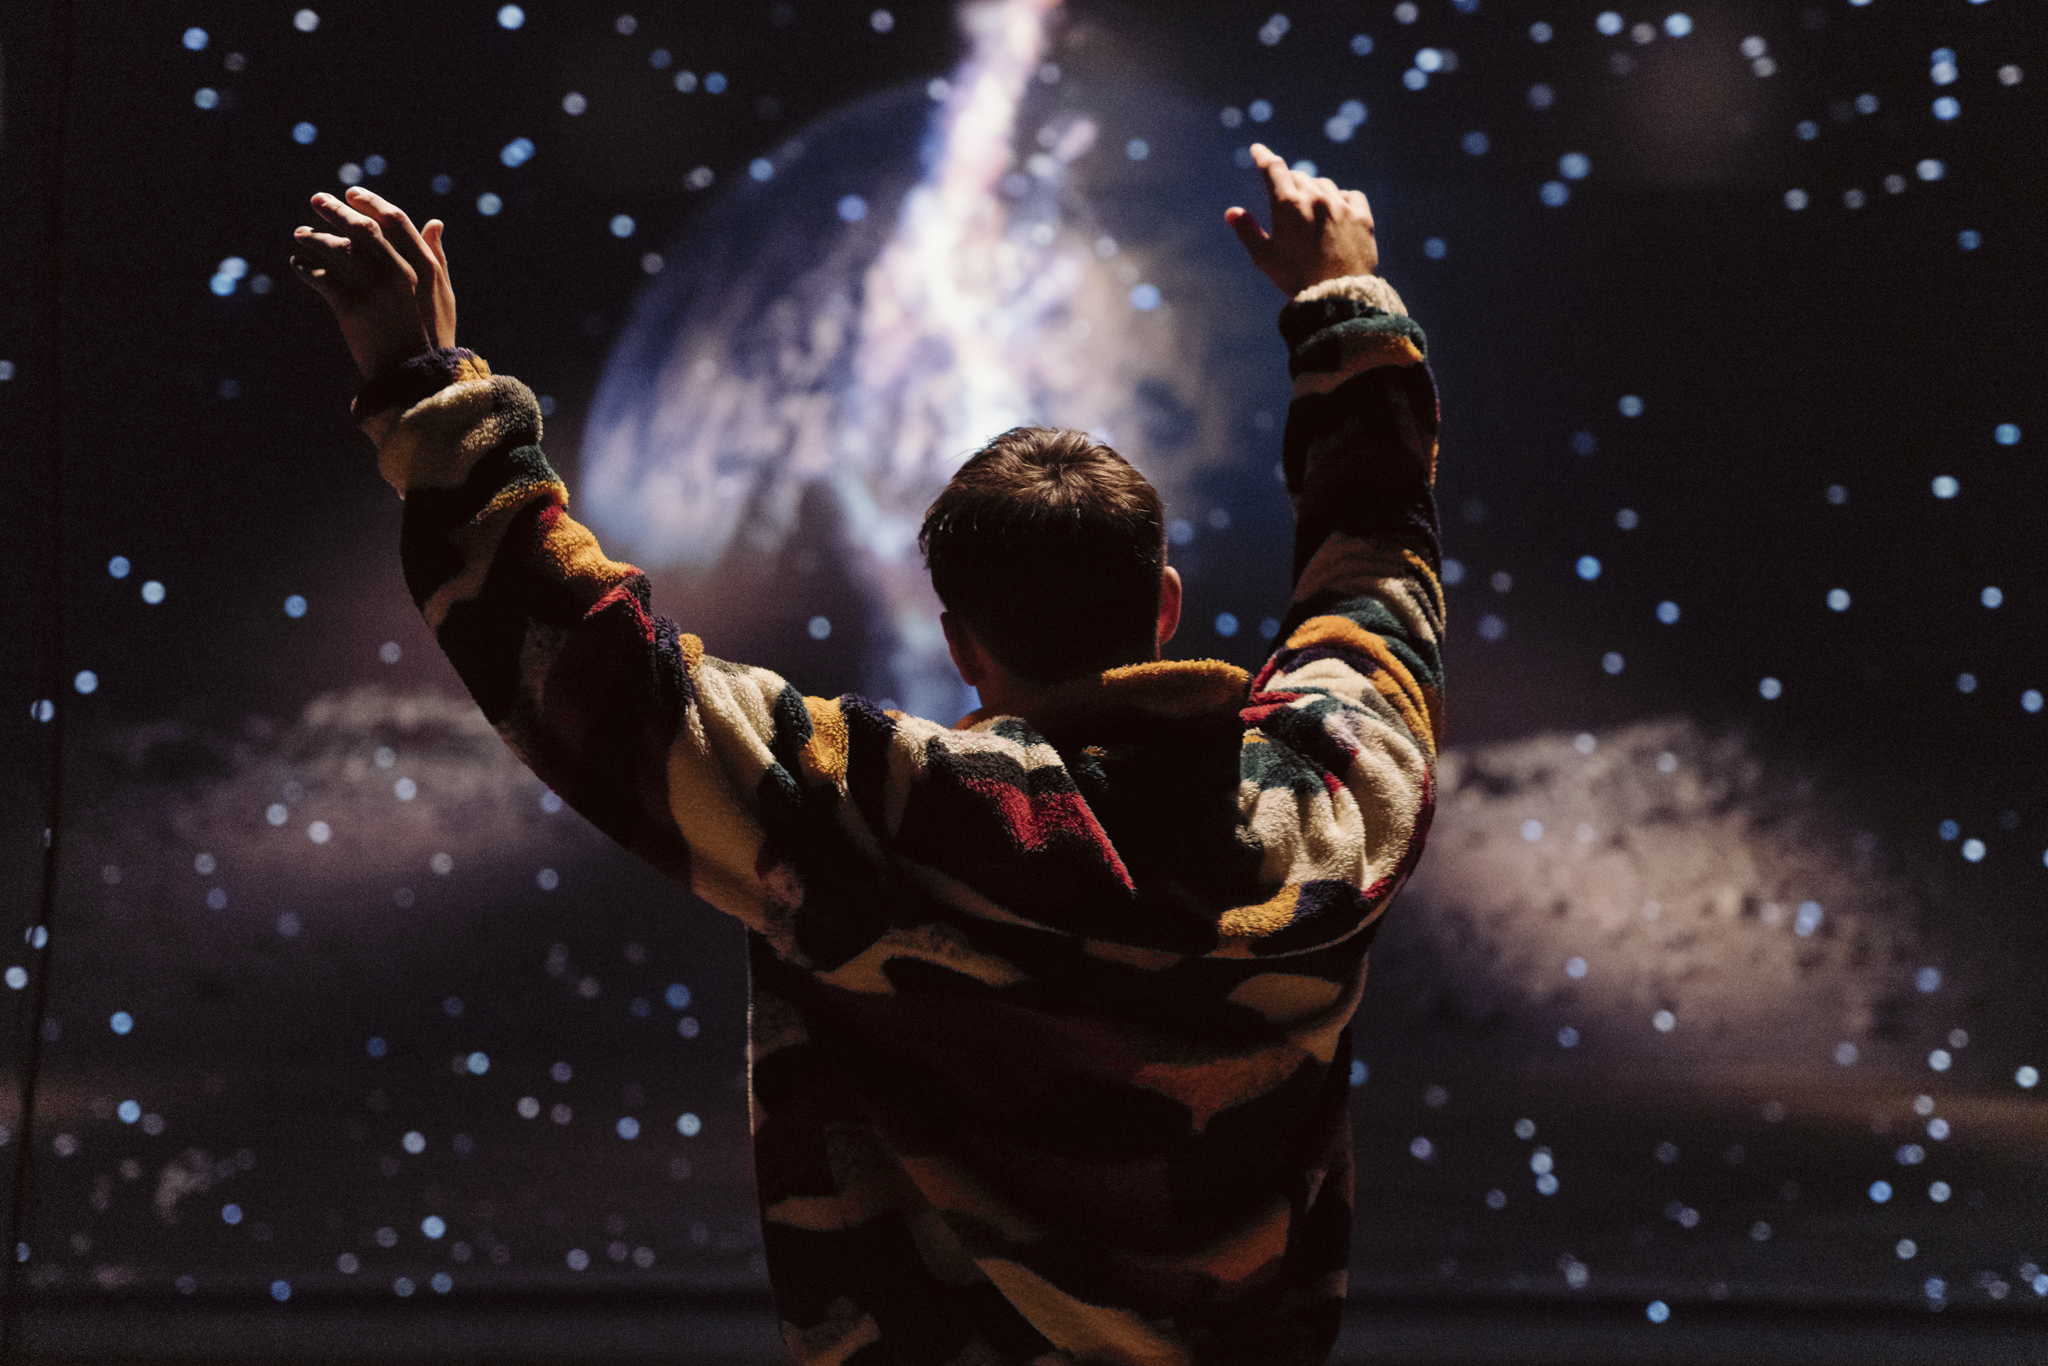 A child seen from behind raising their hands, looking at a galaxy projection